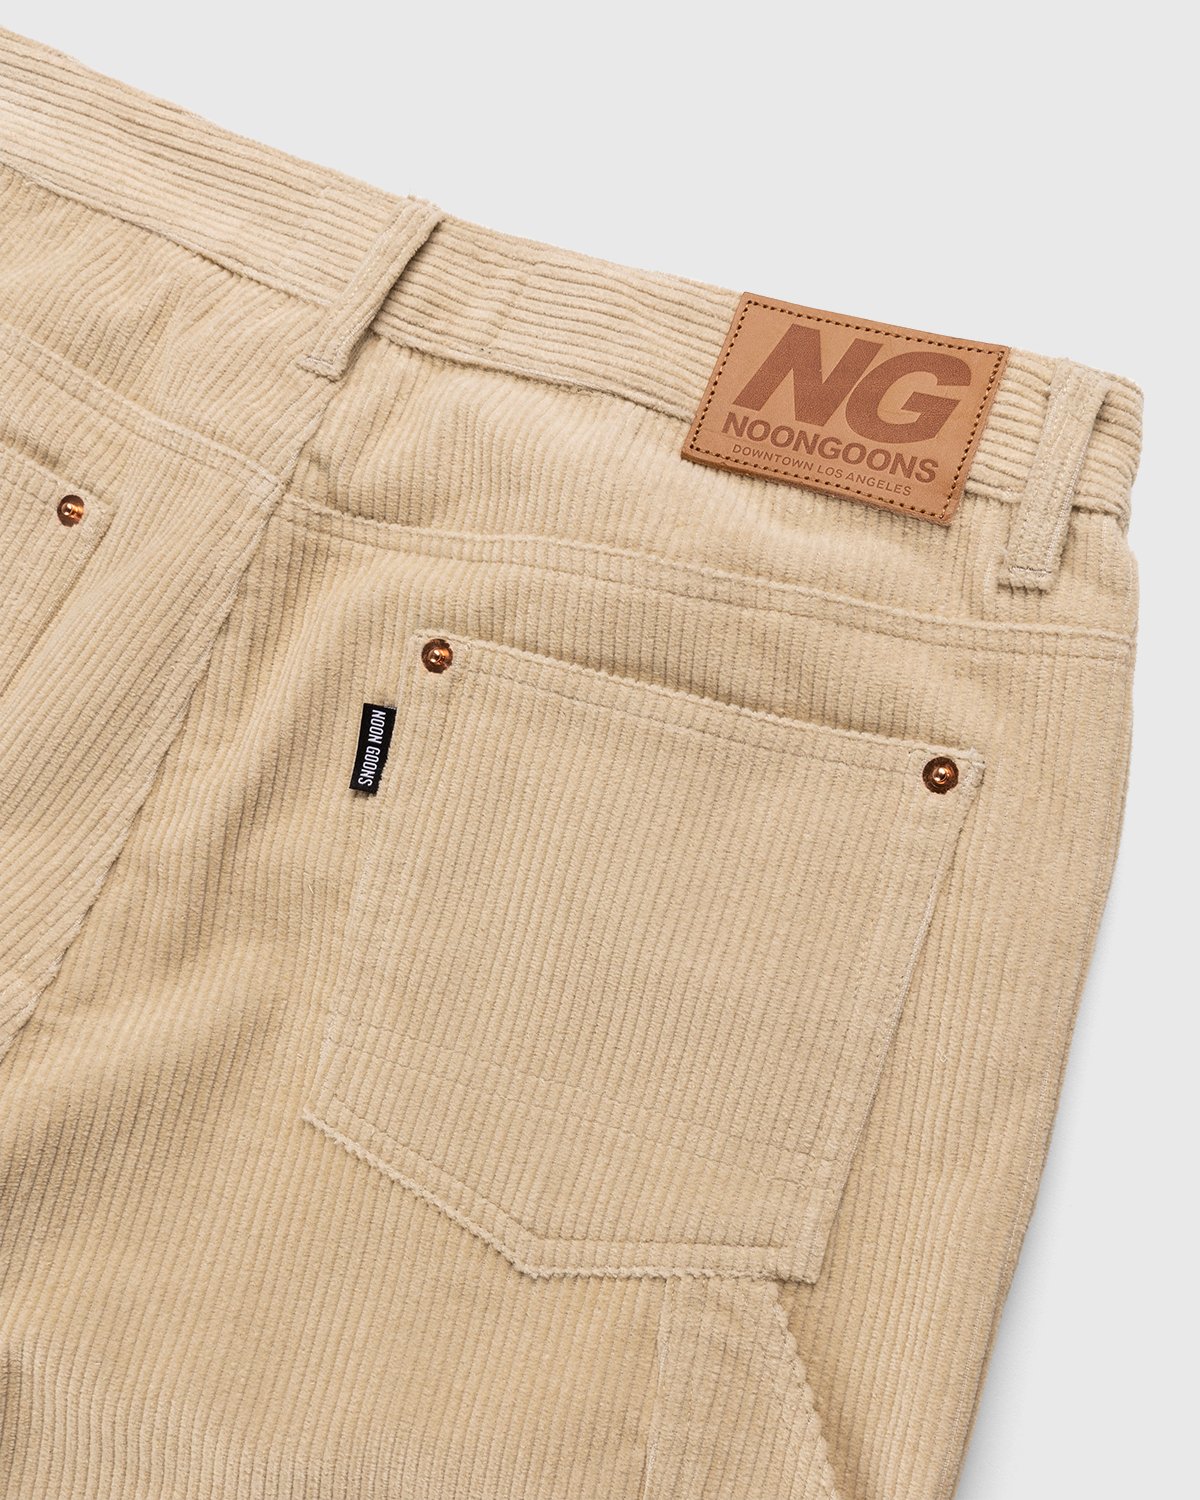 Noon Goons - Sublime Cord Short Overcast - Clothing - Beige - Image 6